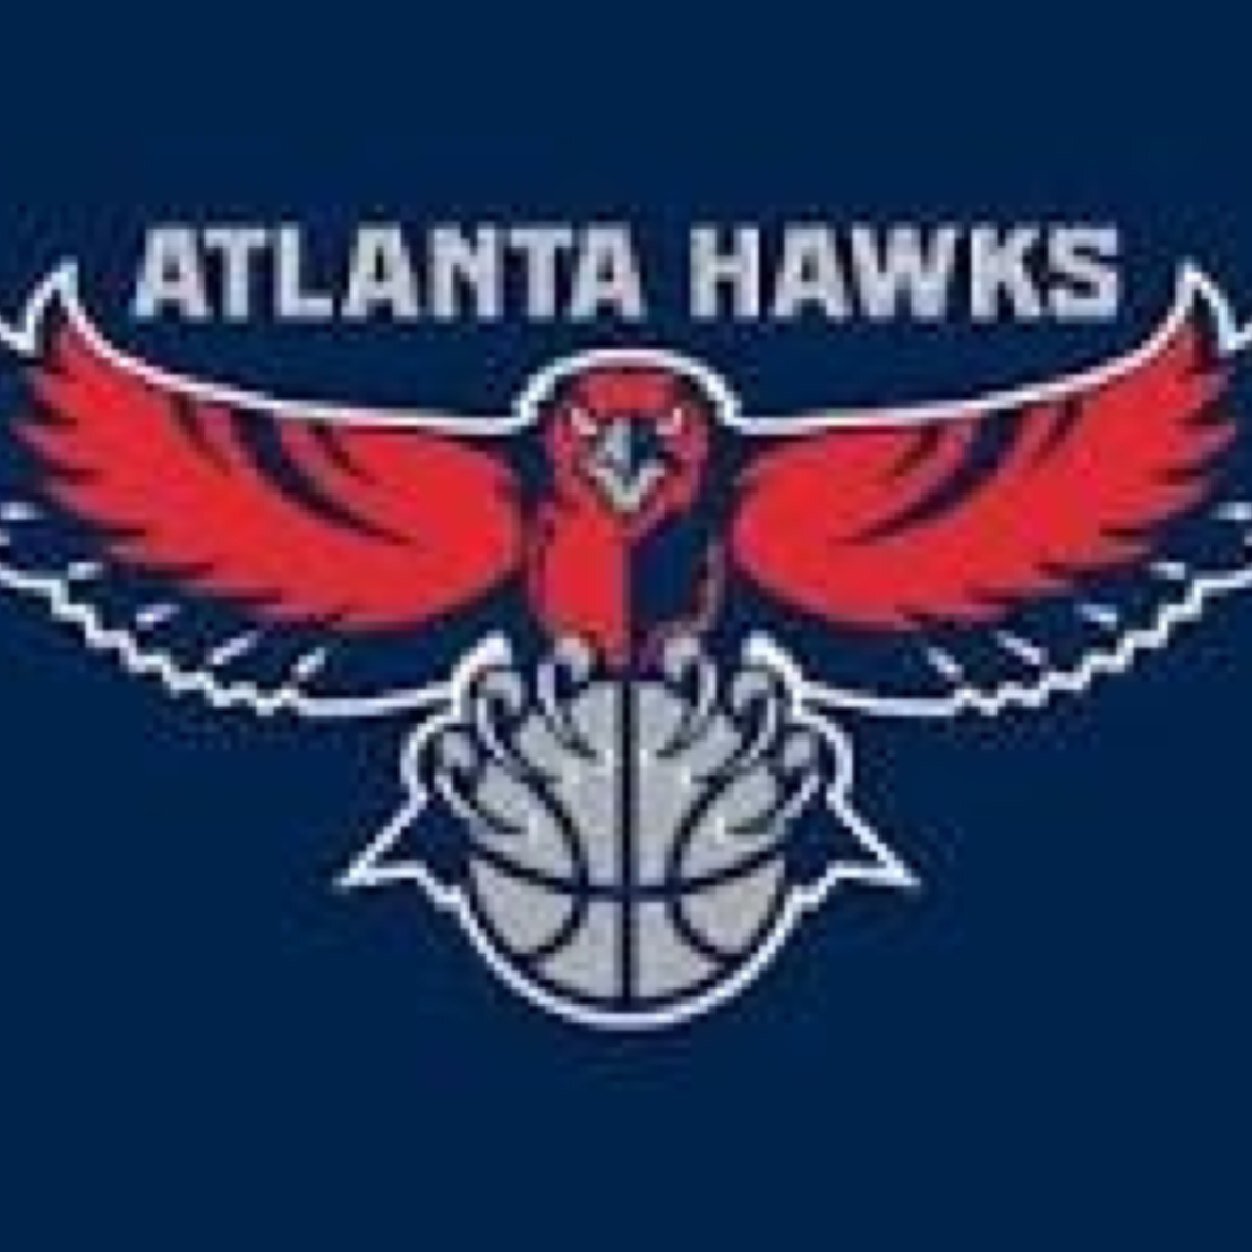 A Sportsaholic that loves ATL sports! Keeping you updated with all of Atlanta's sports! Follow for updates!